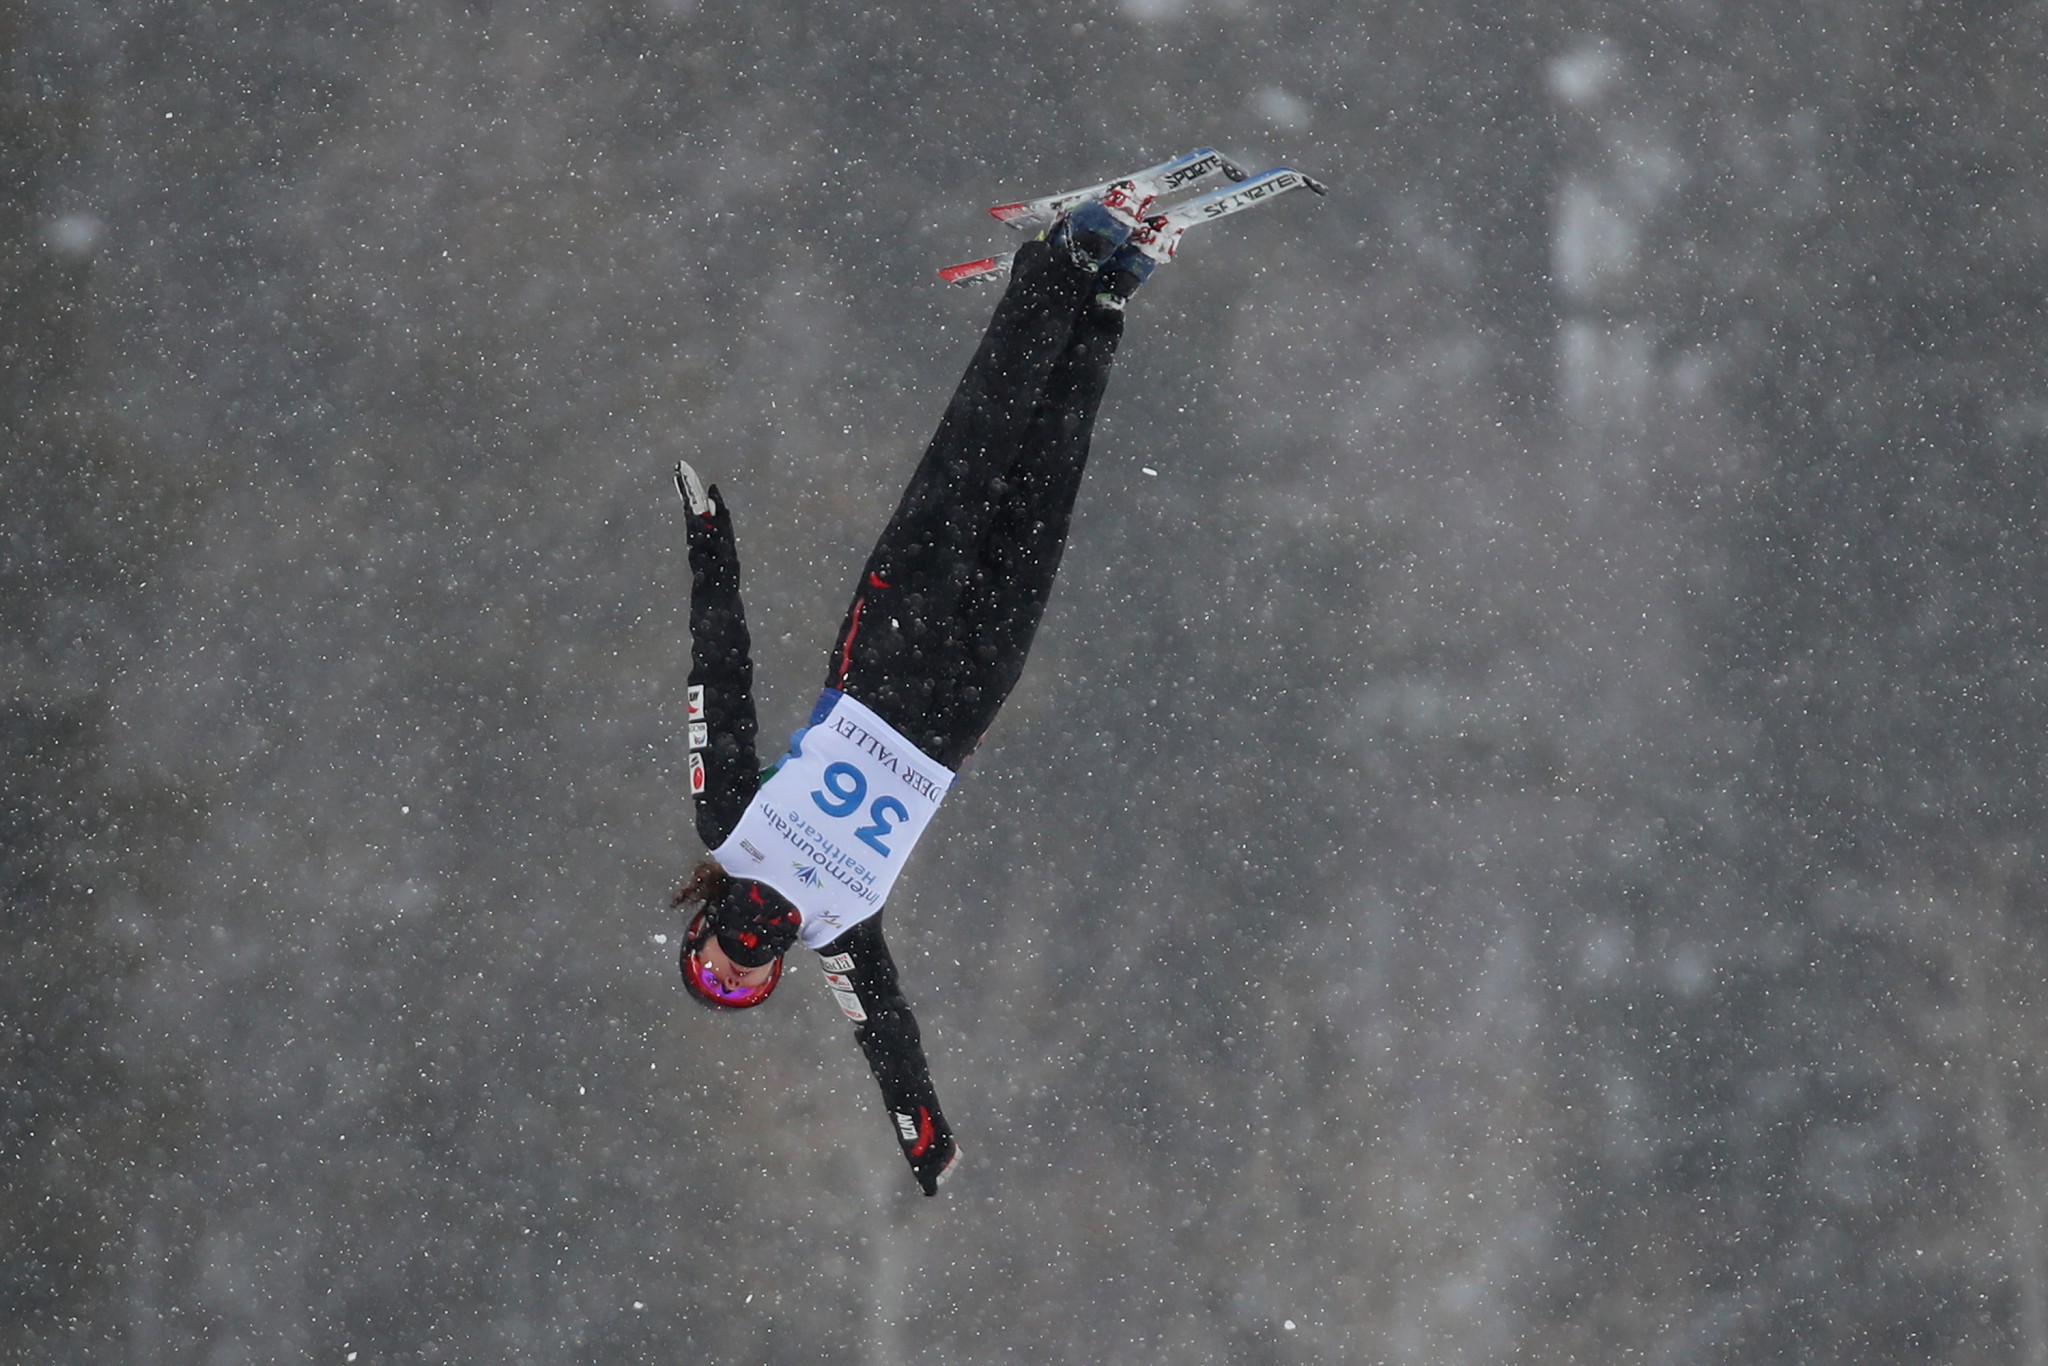 Canadian Marion Thénault won her first FIS Aerials World Cup event of her career in Almaty ©Getty Images 